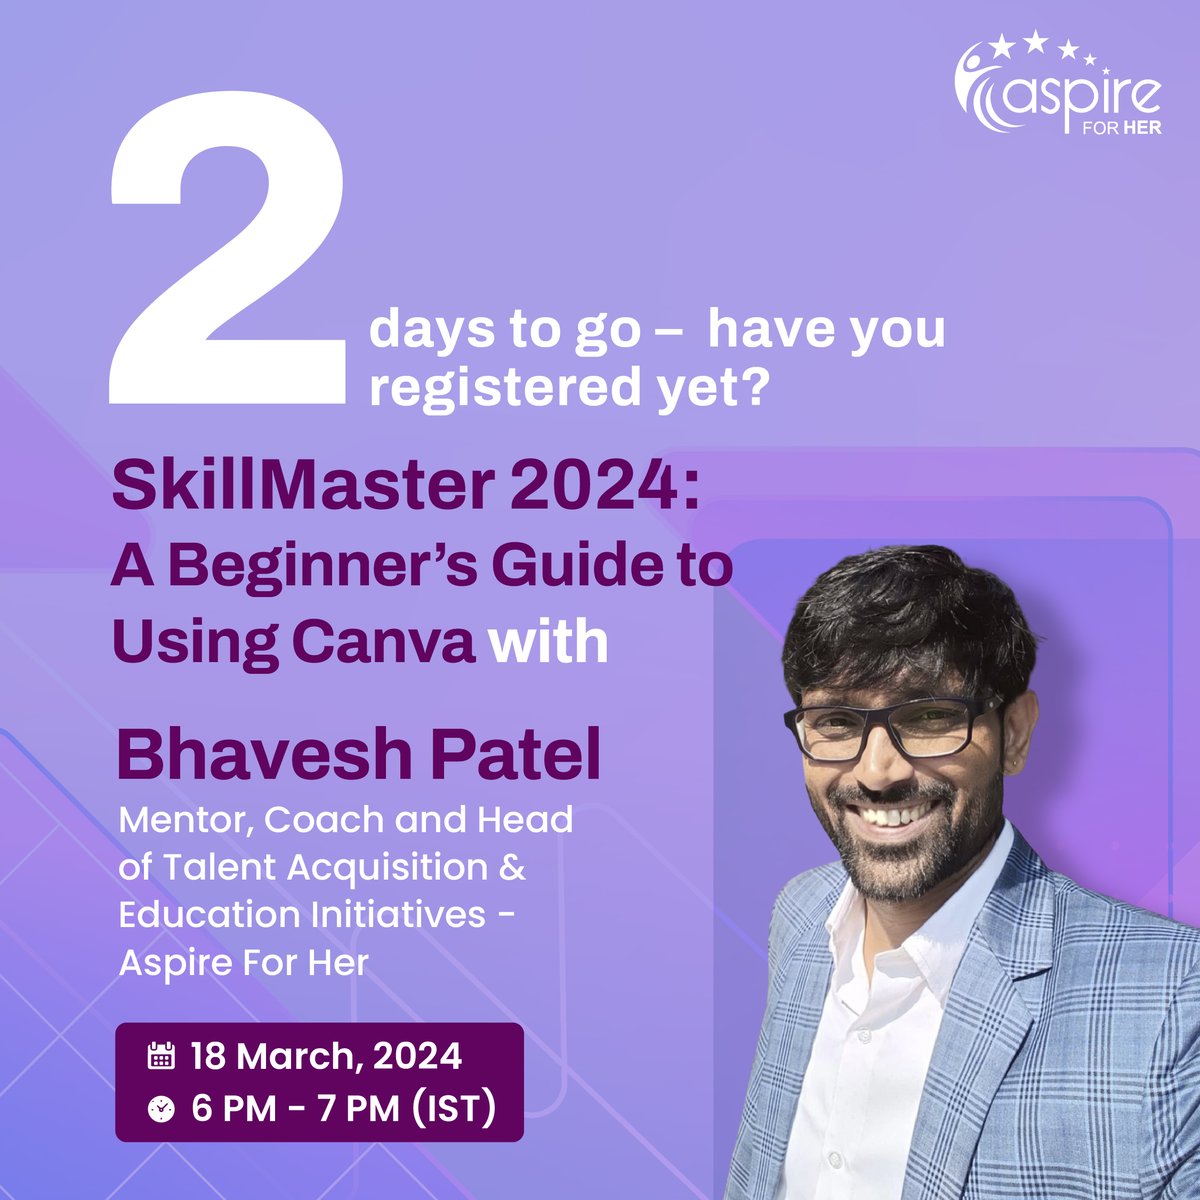 Don't forget - join this SkillMaster 2024 workshop to build your Canva expertise. Led by Bhavesh Patel, you'll learn how to make the best of the tool, with tips & tricks. Join for free: zoom.us/webinar/regist…